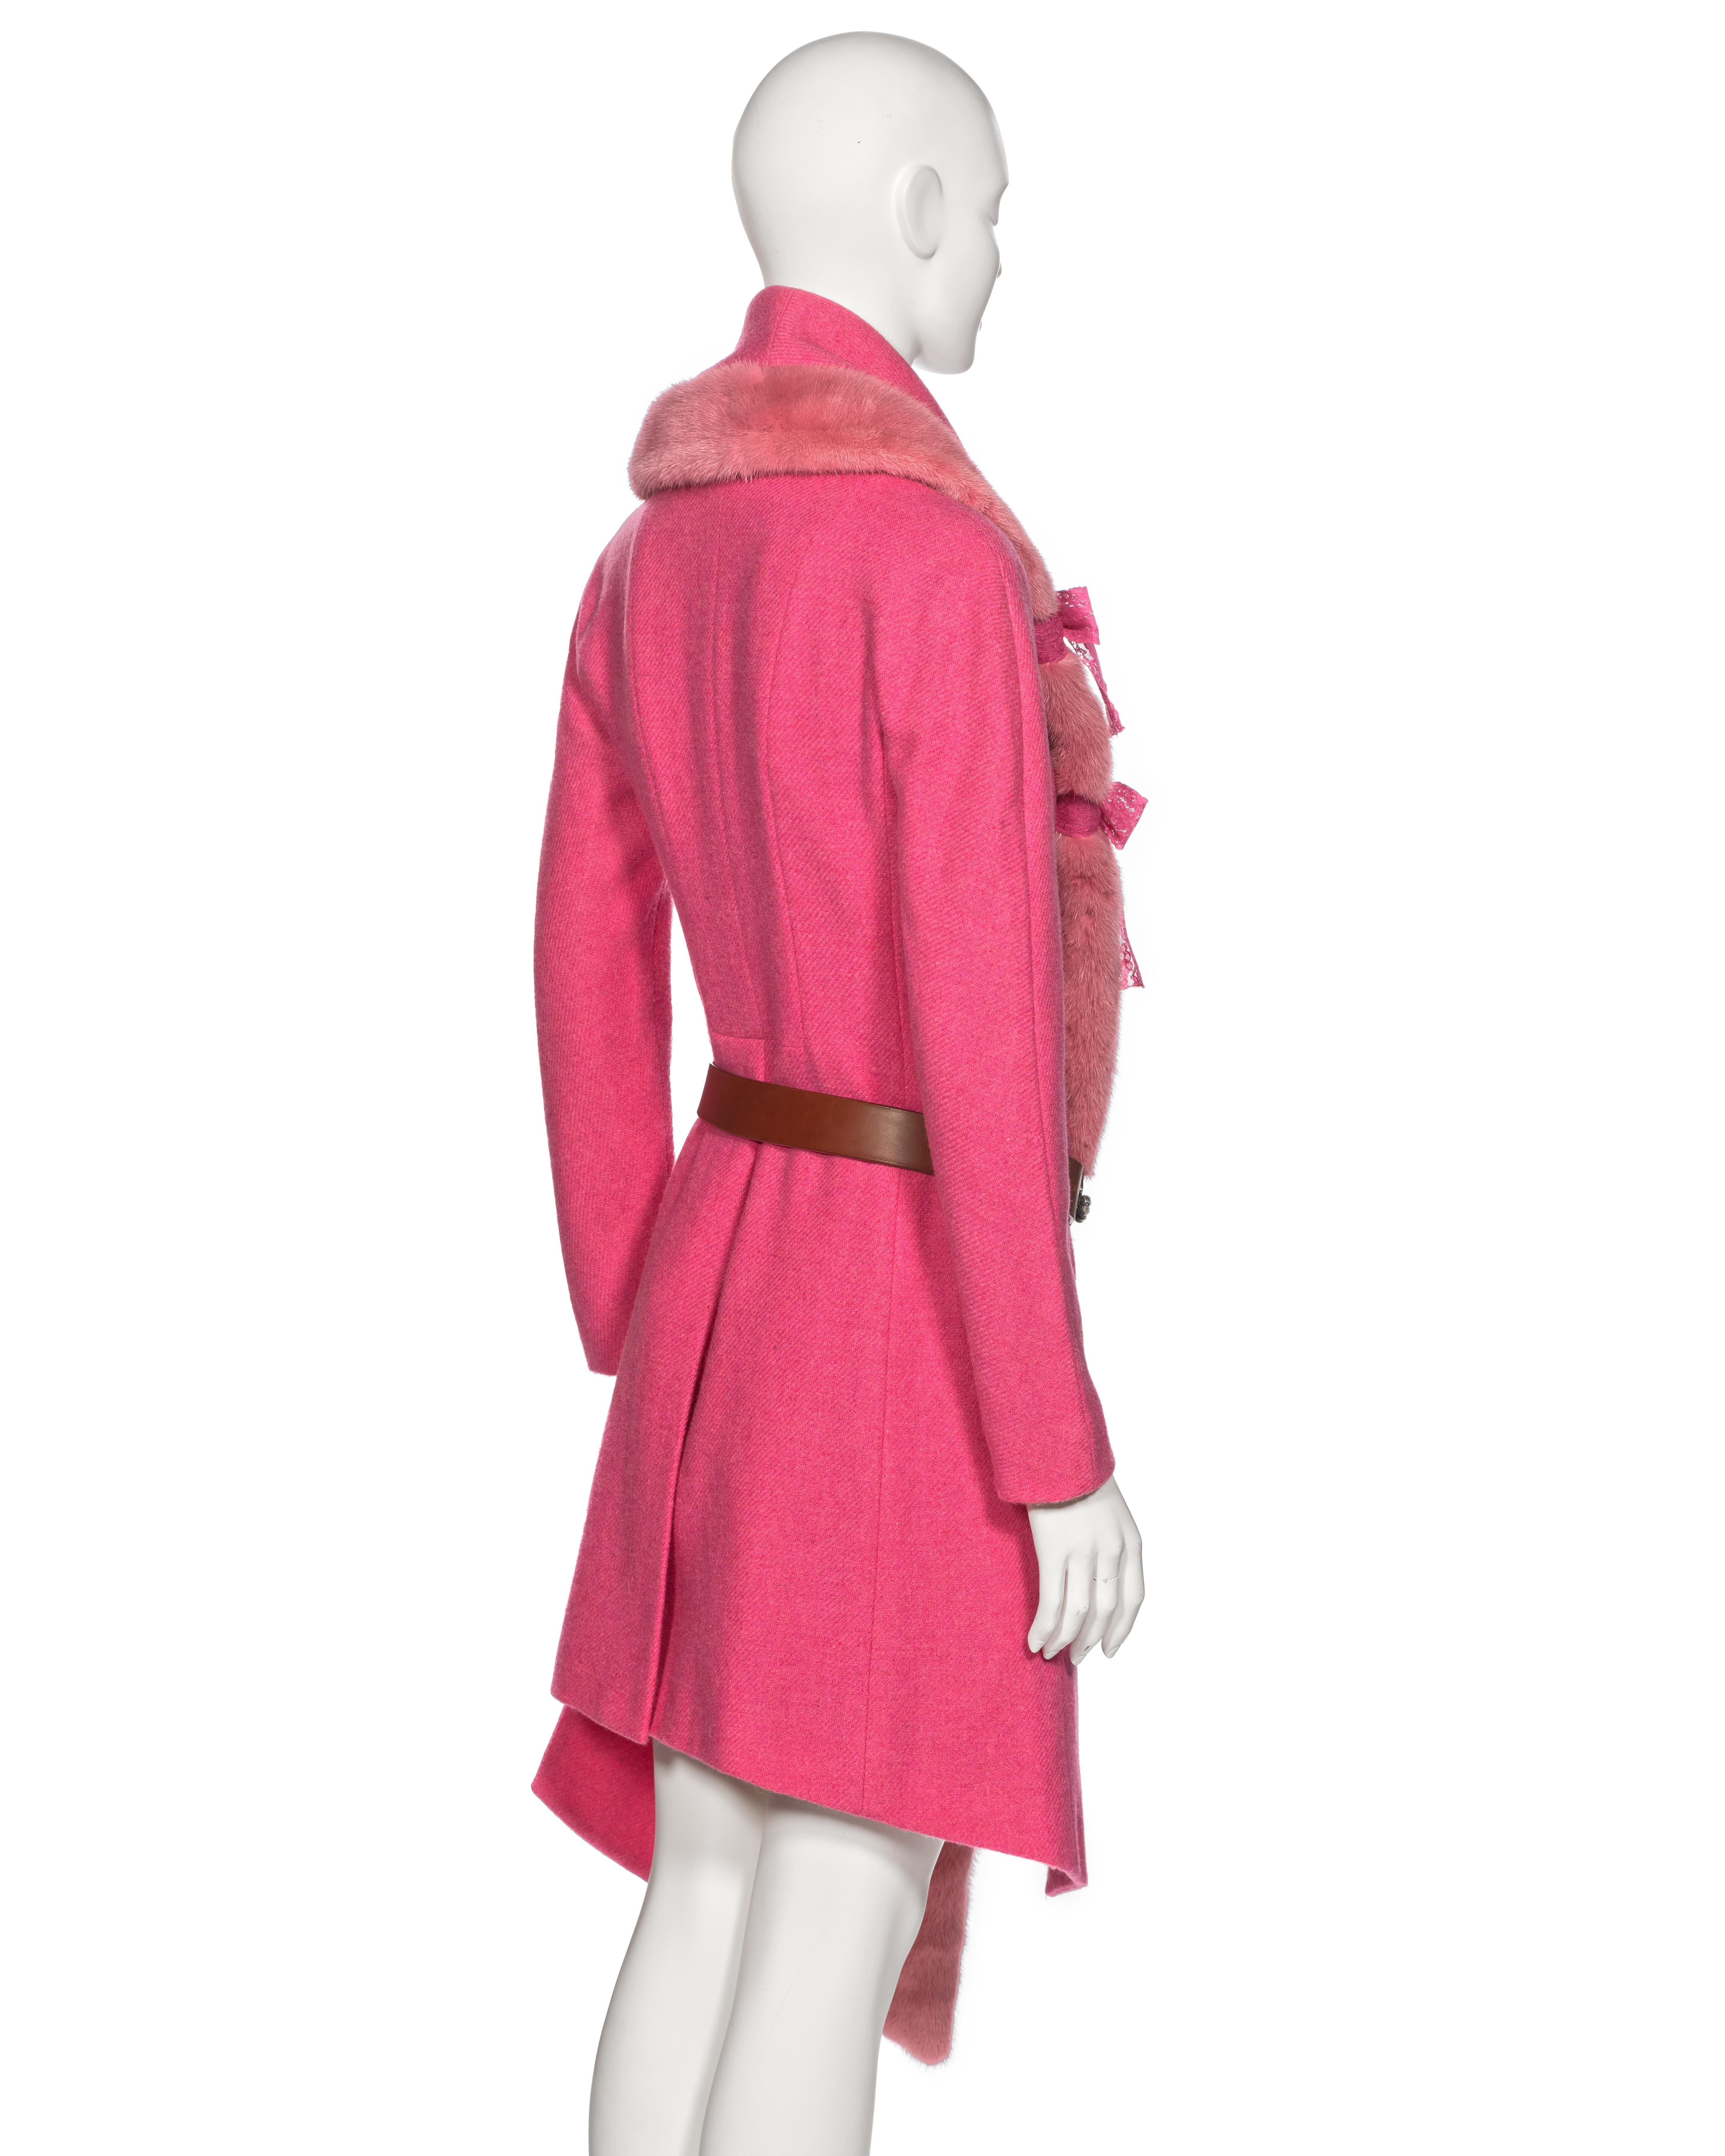 Christian Dior by John Galliano Pink Tweed Coat With Mink Fur Collar, fw 1998 For Sale 4